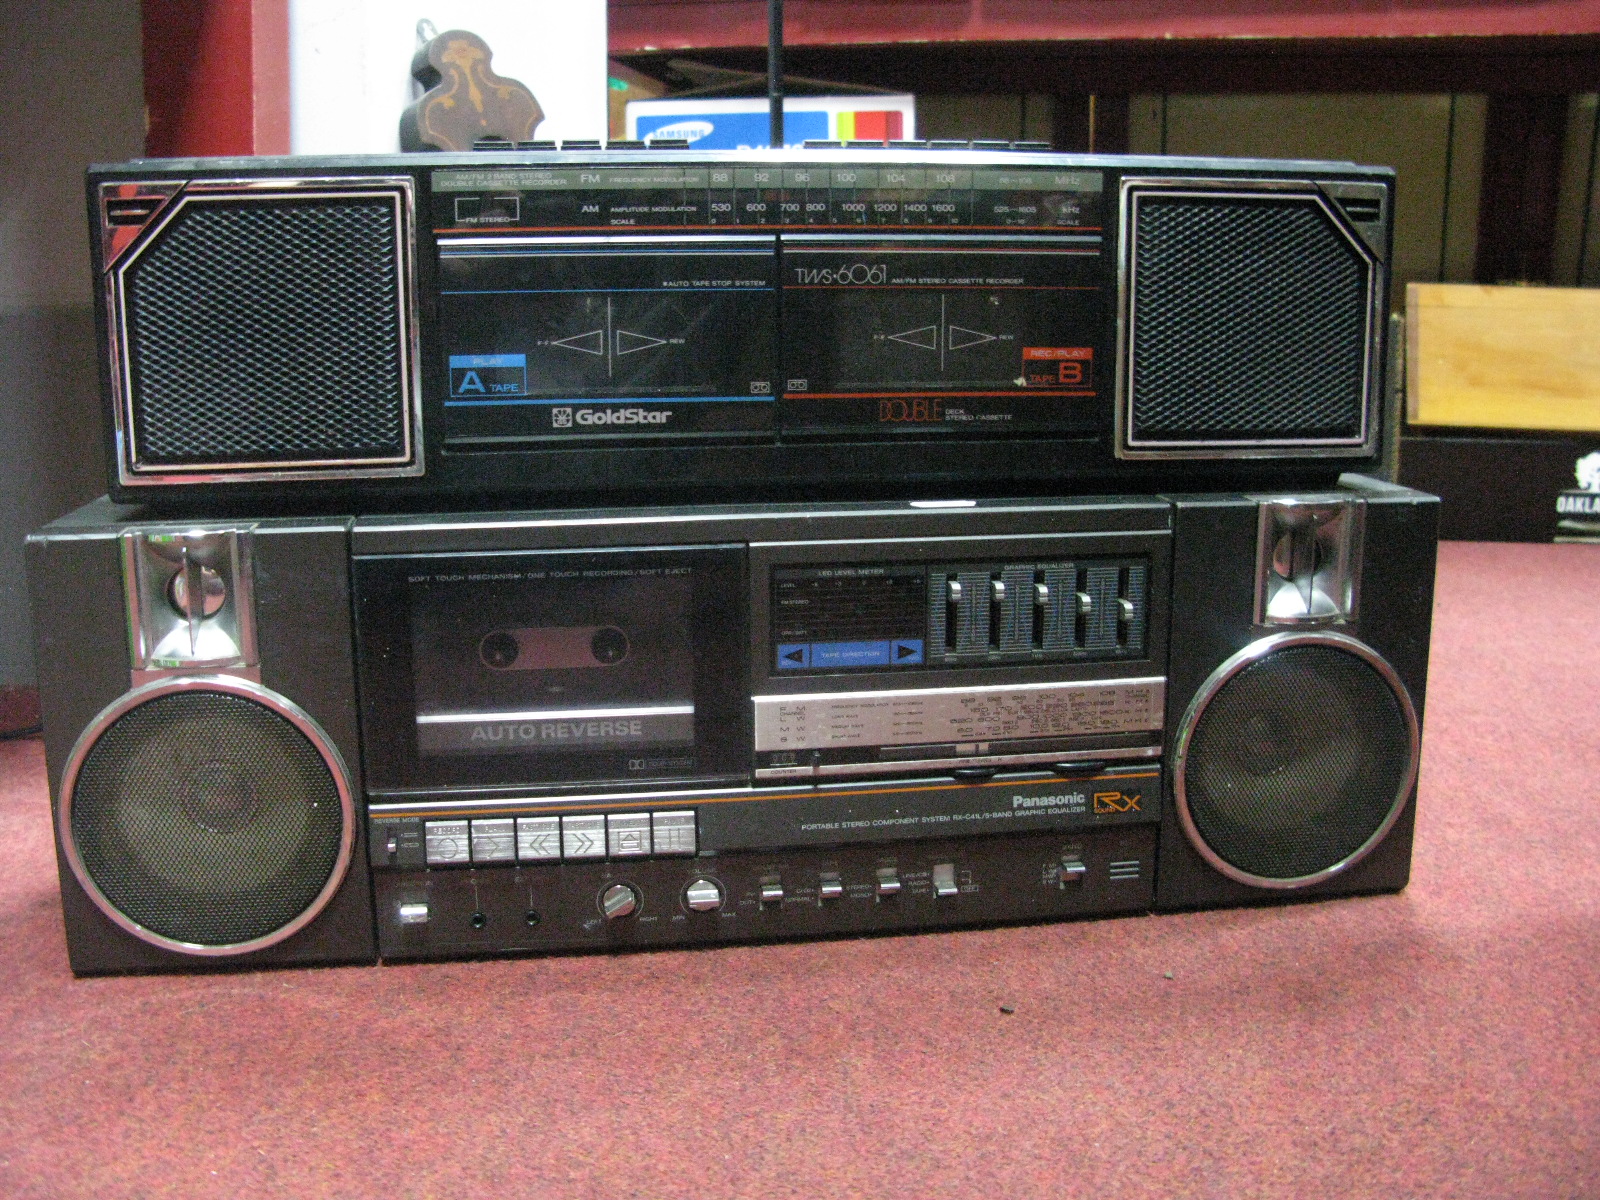 A Panasonic RX-C41L Portable Music Centre, Goldstar TWS-6661 example - both untested sold for